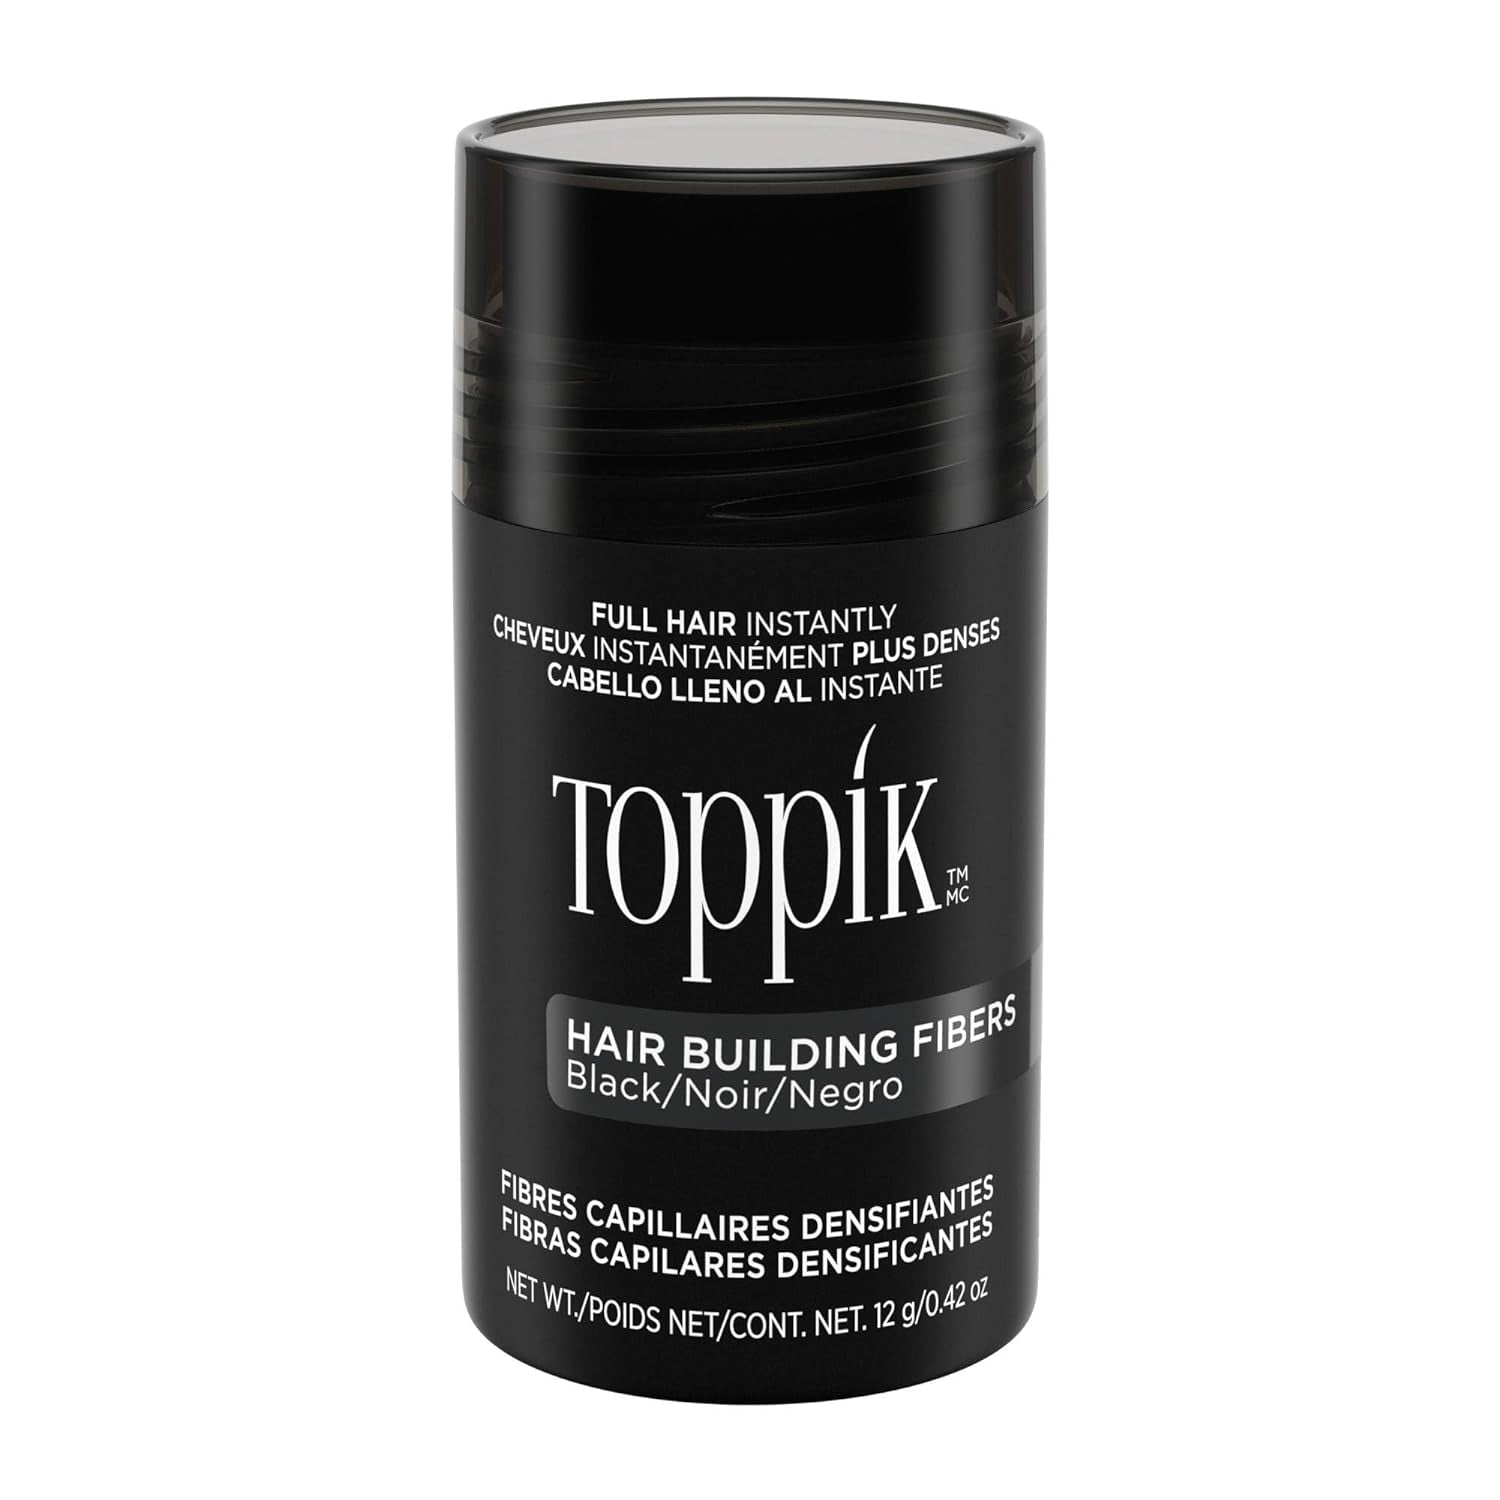 Toppik Hair Building Fibers, 12G Fill in Fine or Thinning Hair Instantly Thicker, Fuller Looking Hair 9 Shades for Men & Women